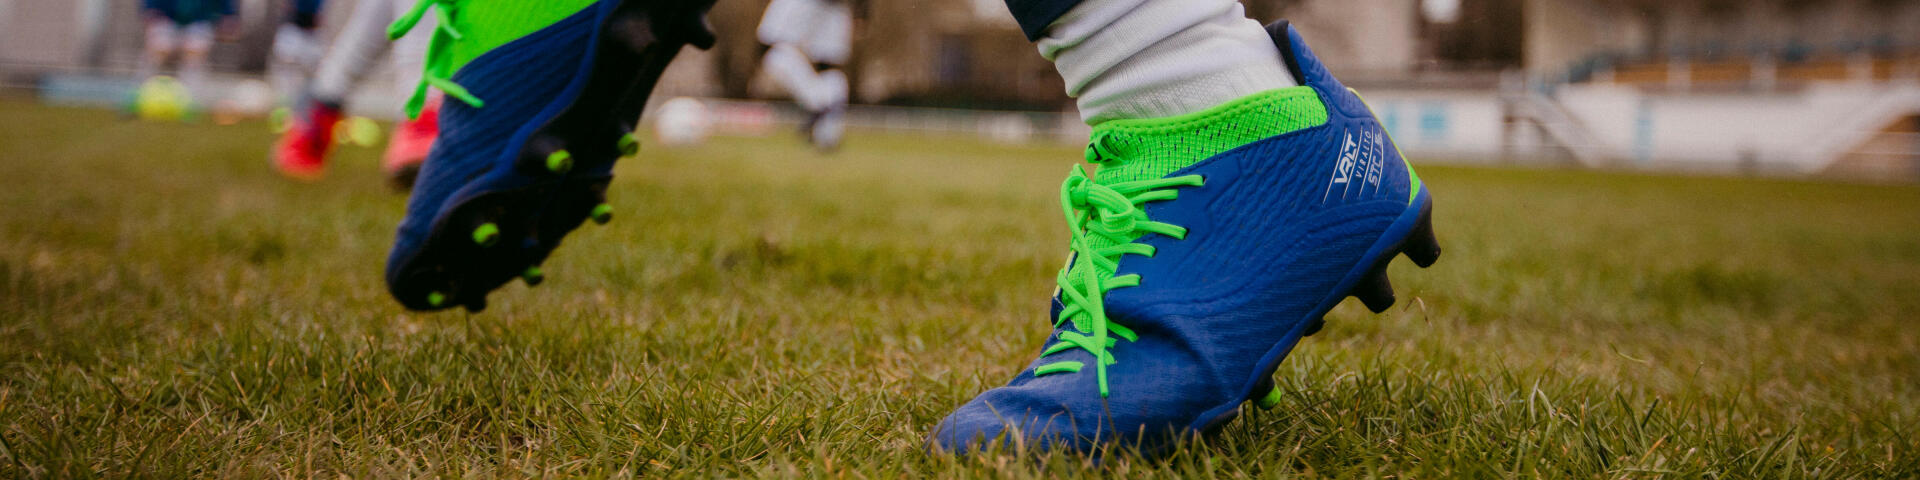 How to Choose Your Next Pair of Soccer Boots